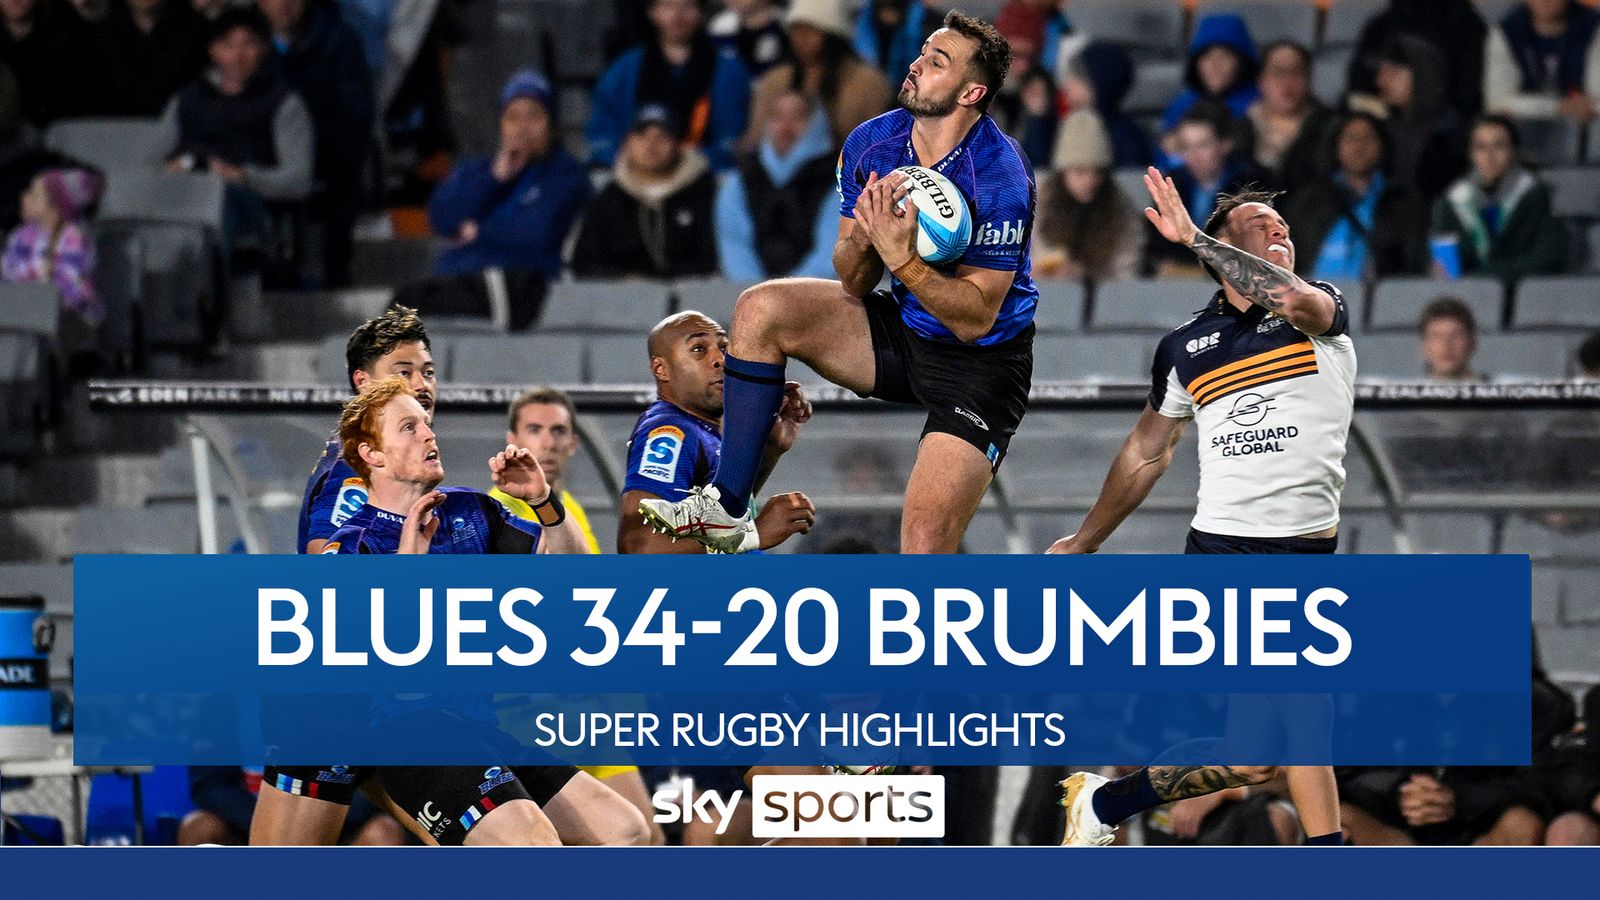 Blues beat brumbies to reach Super Rugby Final